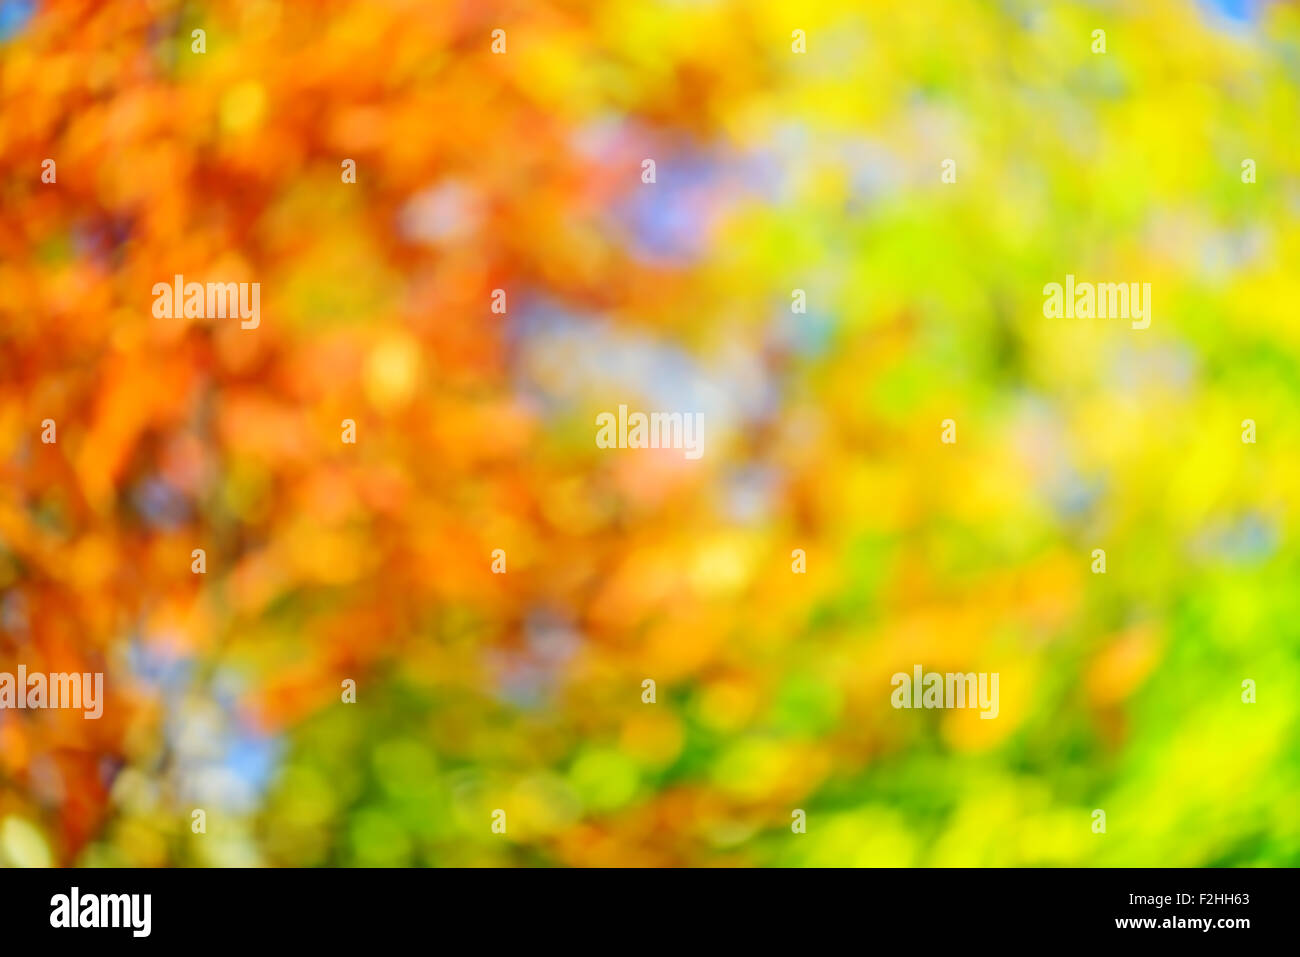 Abstract fall blur decorative background Stock Photo